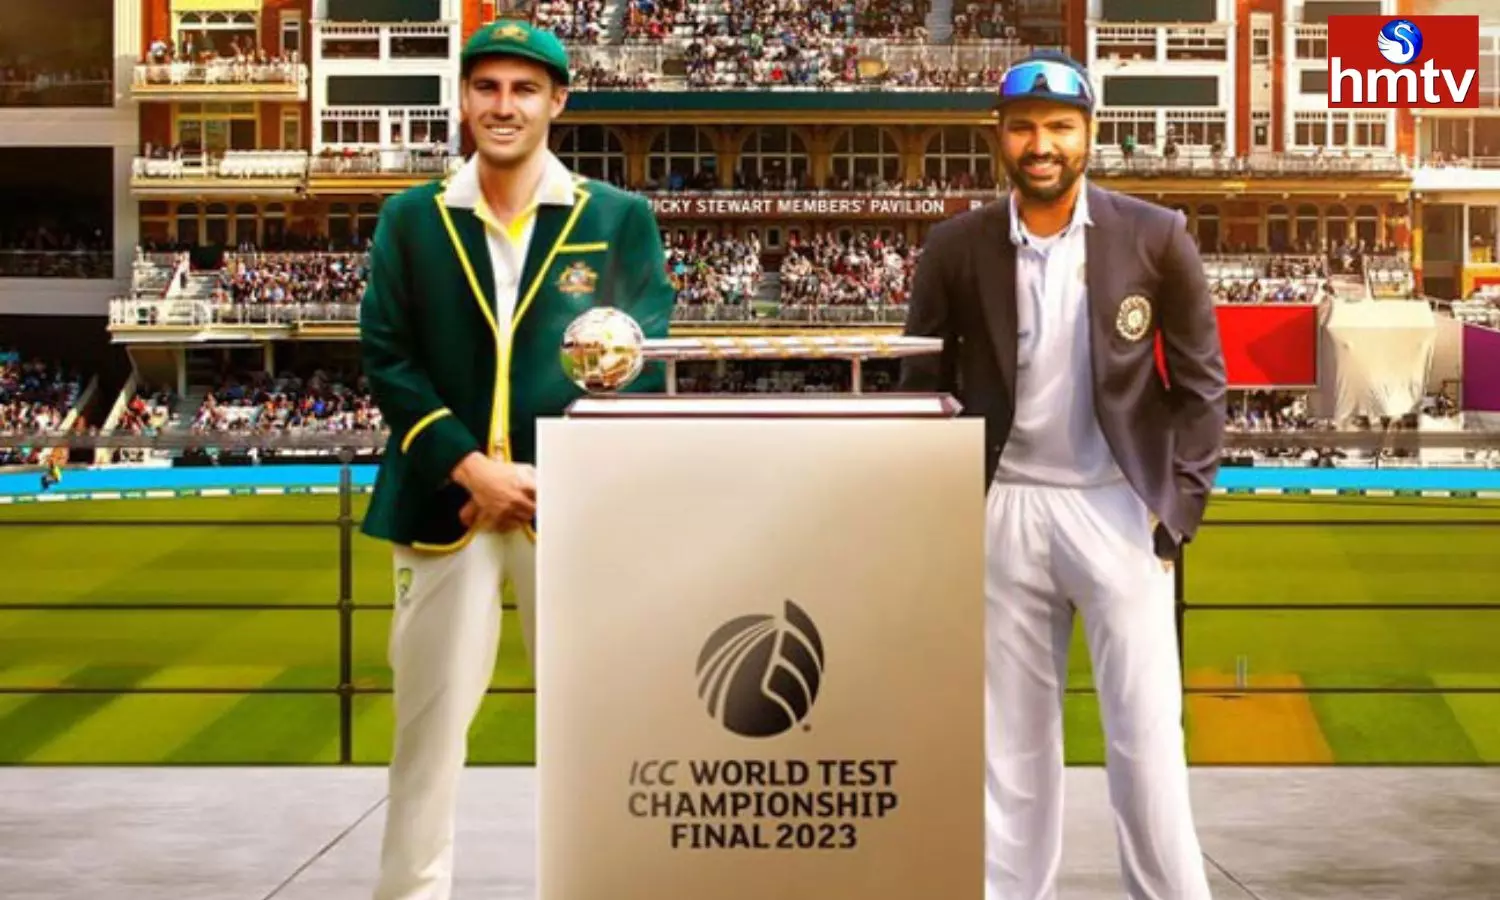 These Records Break and Create in WTC Final 2023 India vs Australia at the Oval London